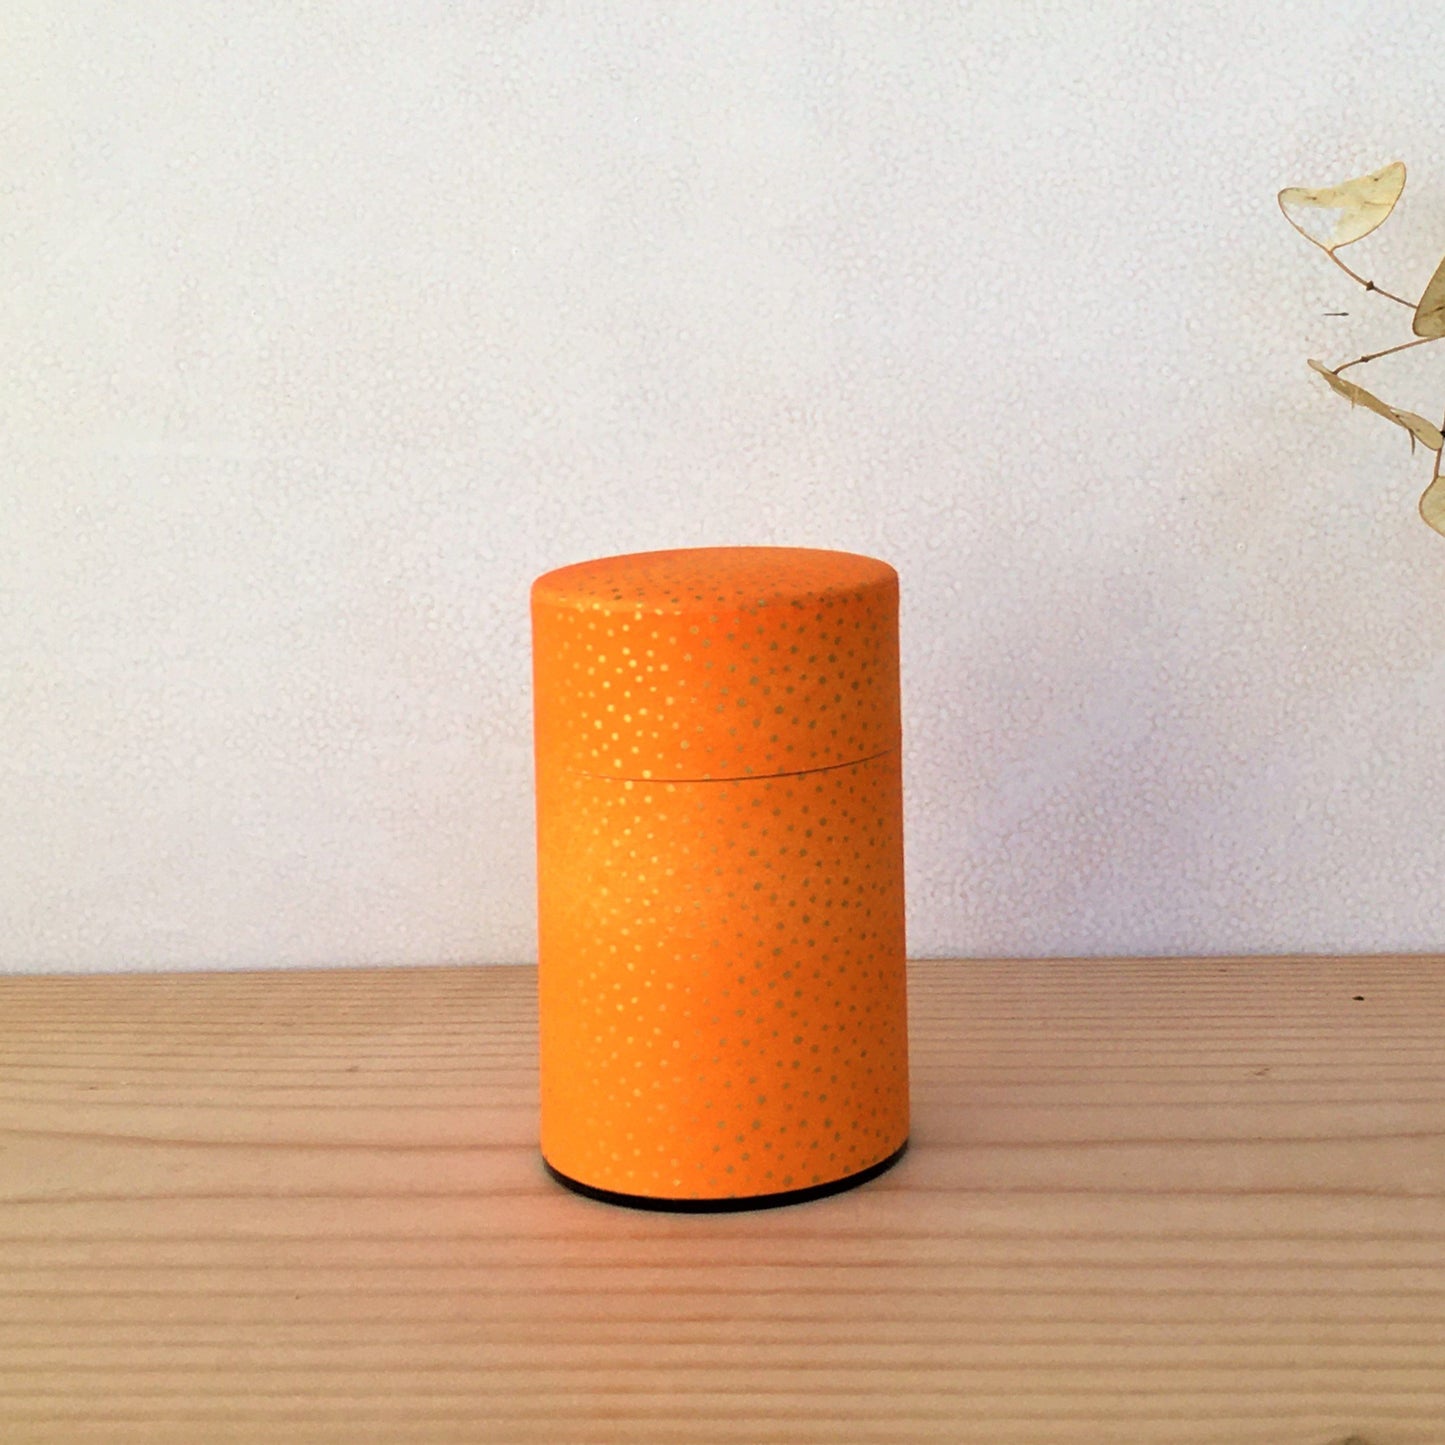 50g Orange with Gold dots, Washi Paper Canister